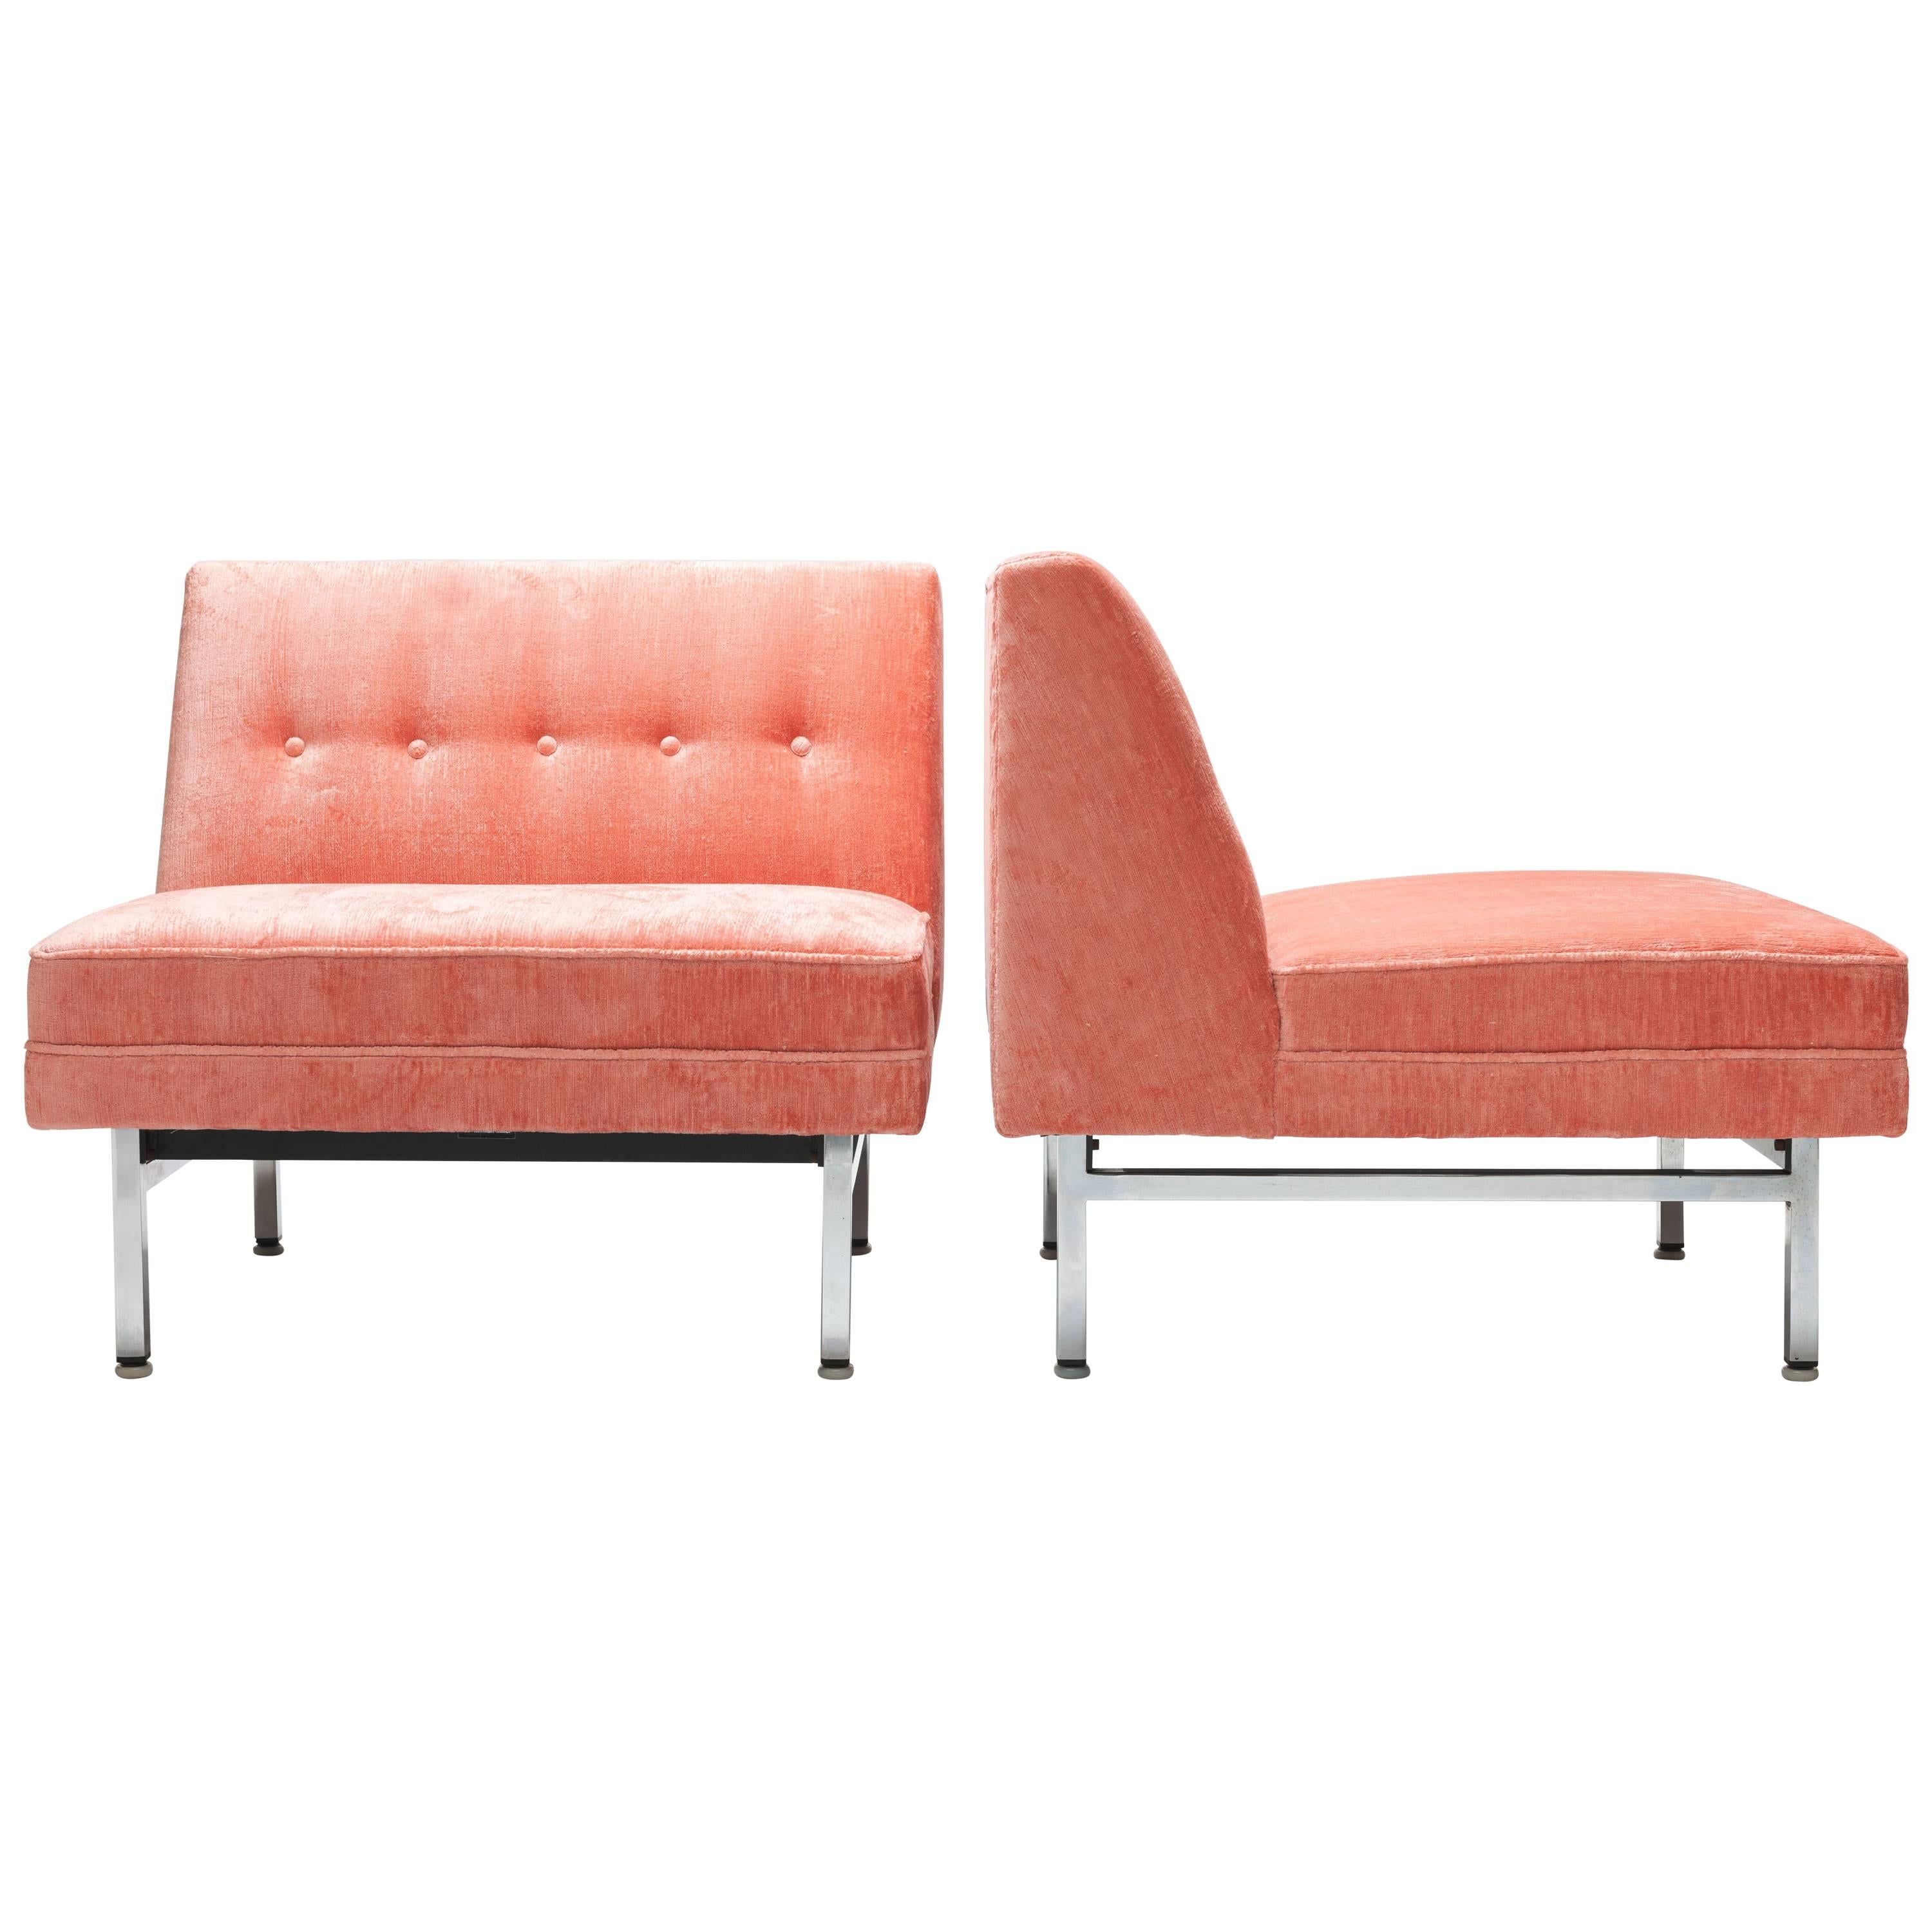 Pink George Nelson Modular Seating Series Chair by Herman Miller